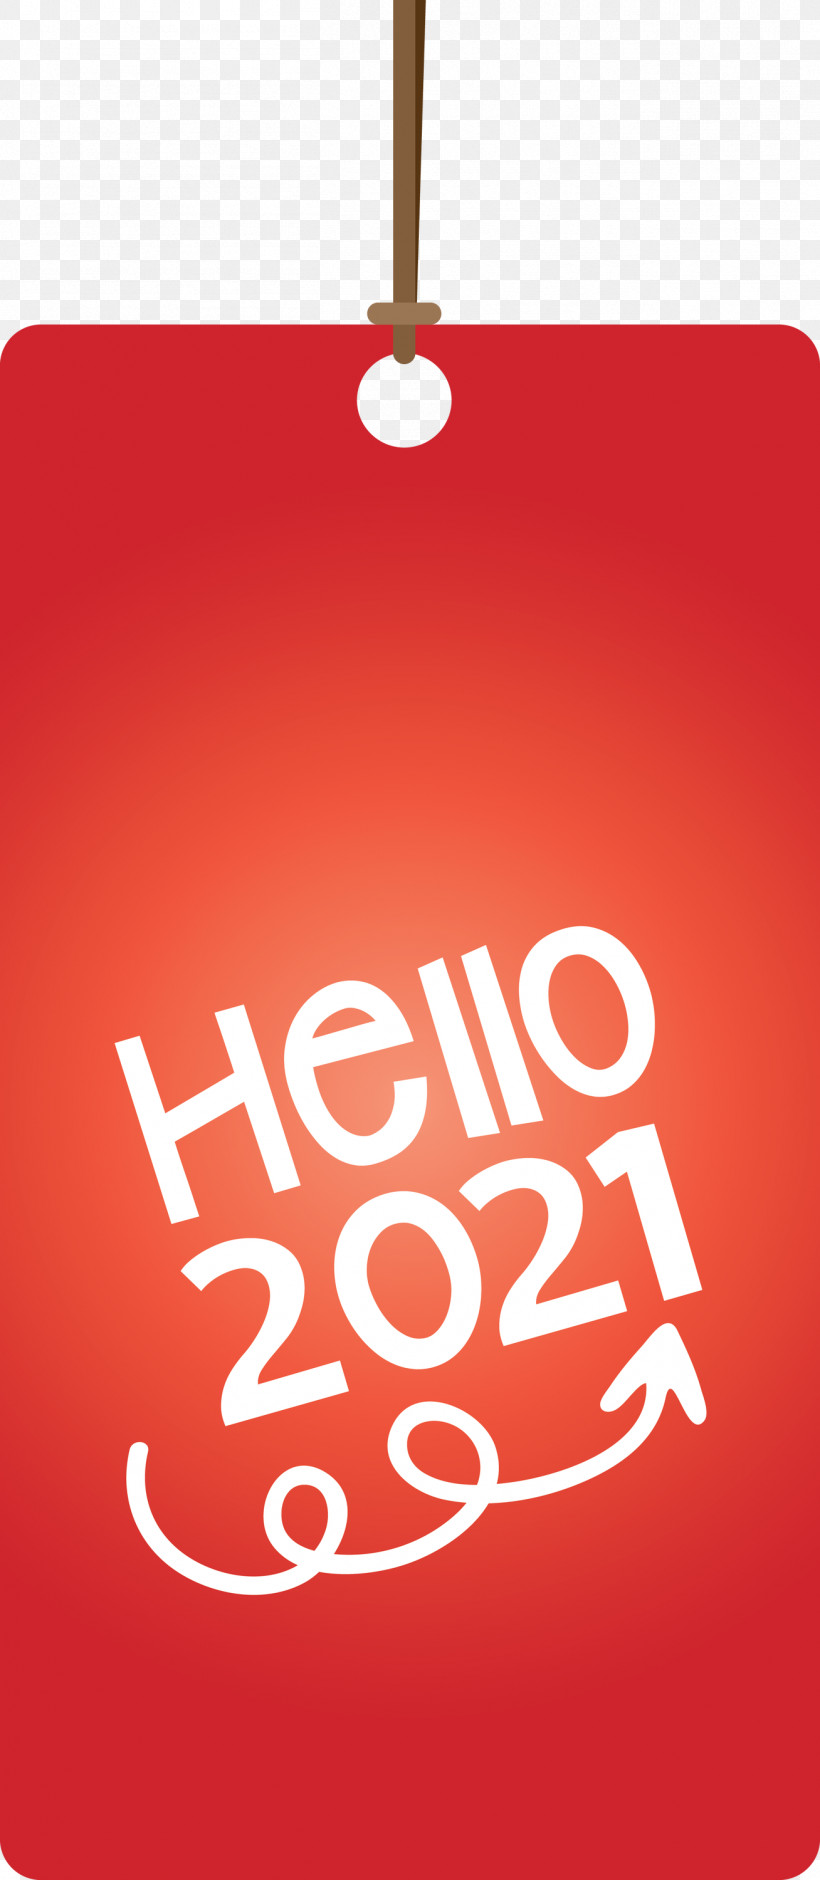 2021 Happy New Year 2021 Happy New Year Tag 2021 New Year, PNG, 1308x3000px, 2021 Happy New Year, 2021 Happy New Year Tag, 2021 New Year, Christmas Day, Christmas Ornament Download Free